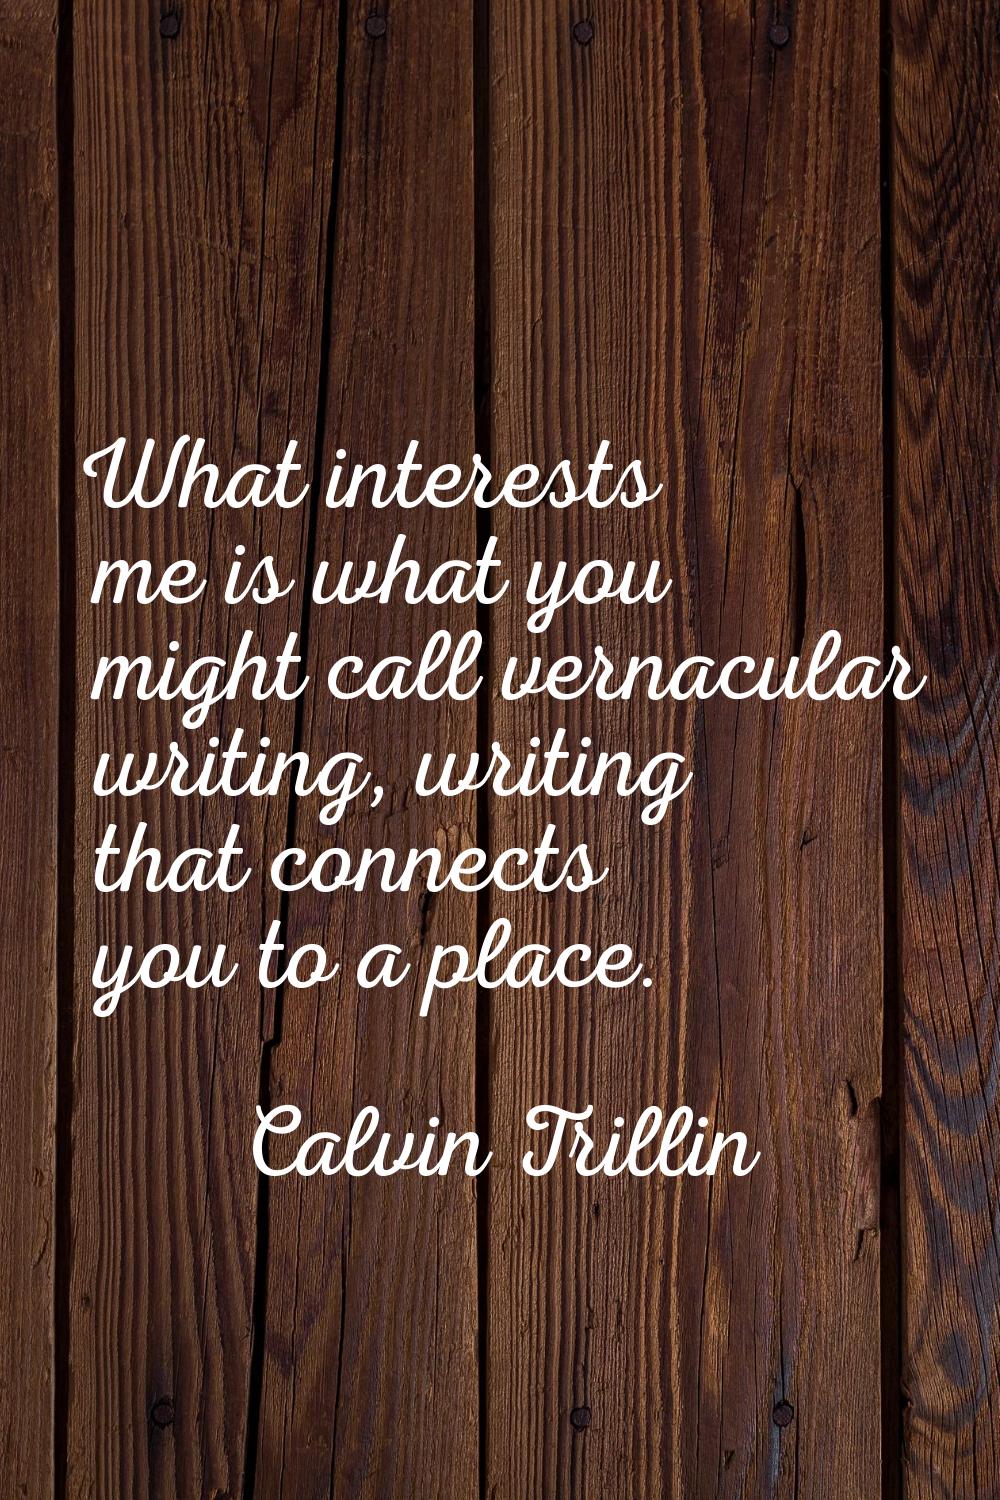 What interests me is what you might call vernacular writing, writing that connects you to a place.